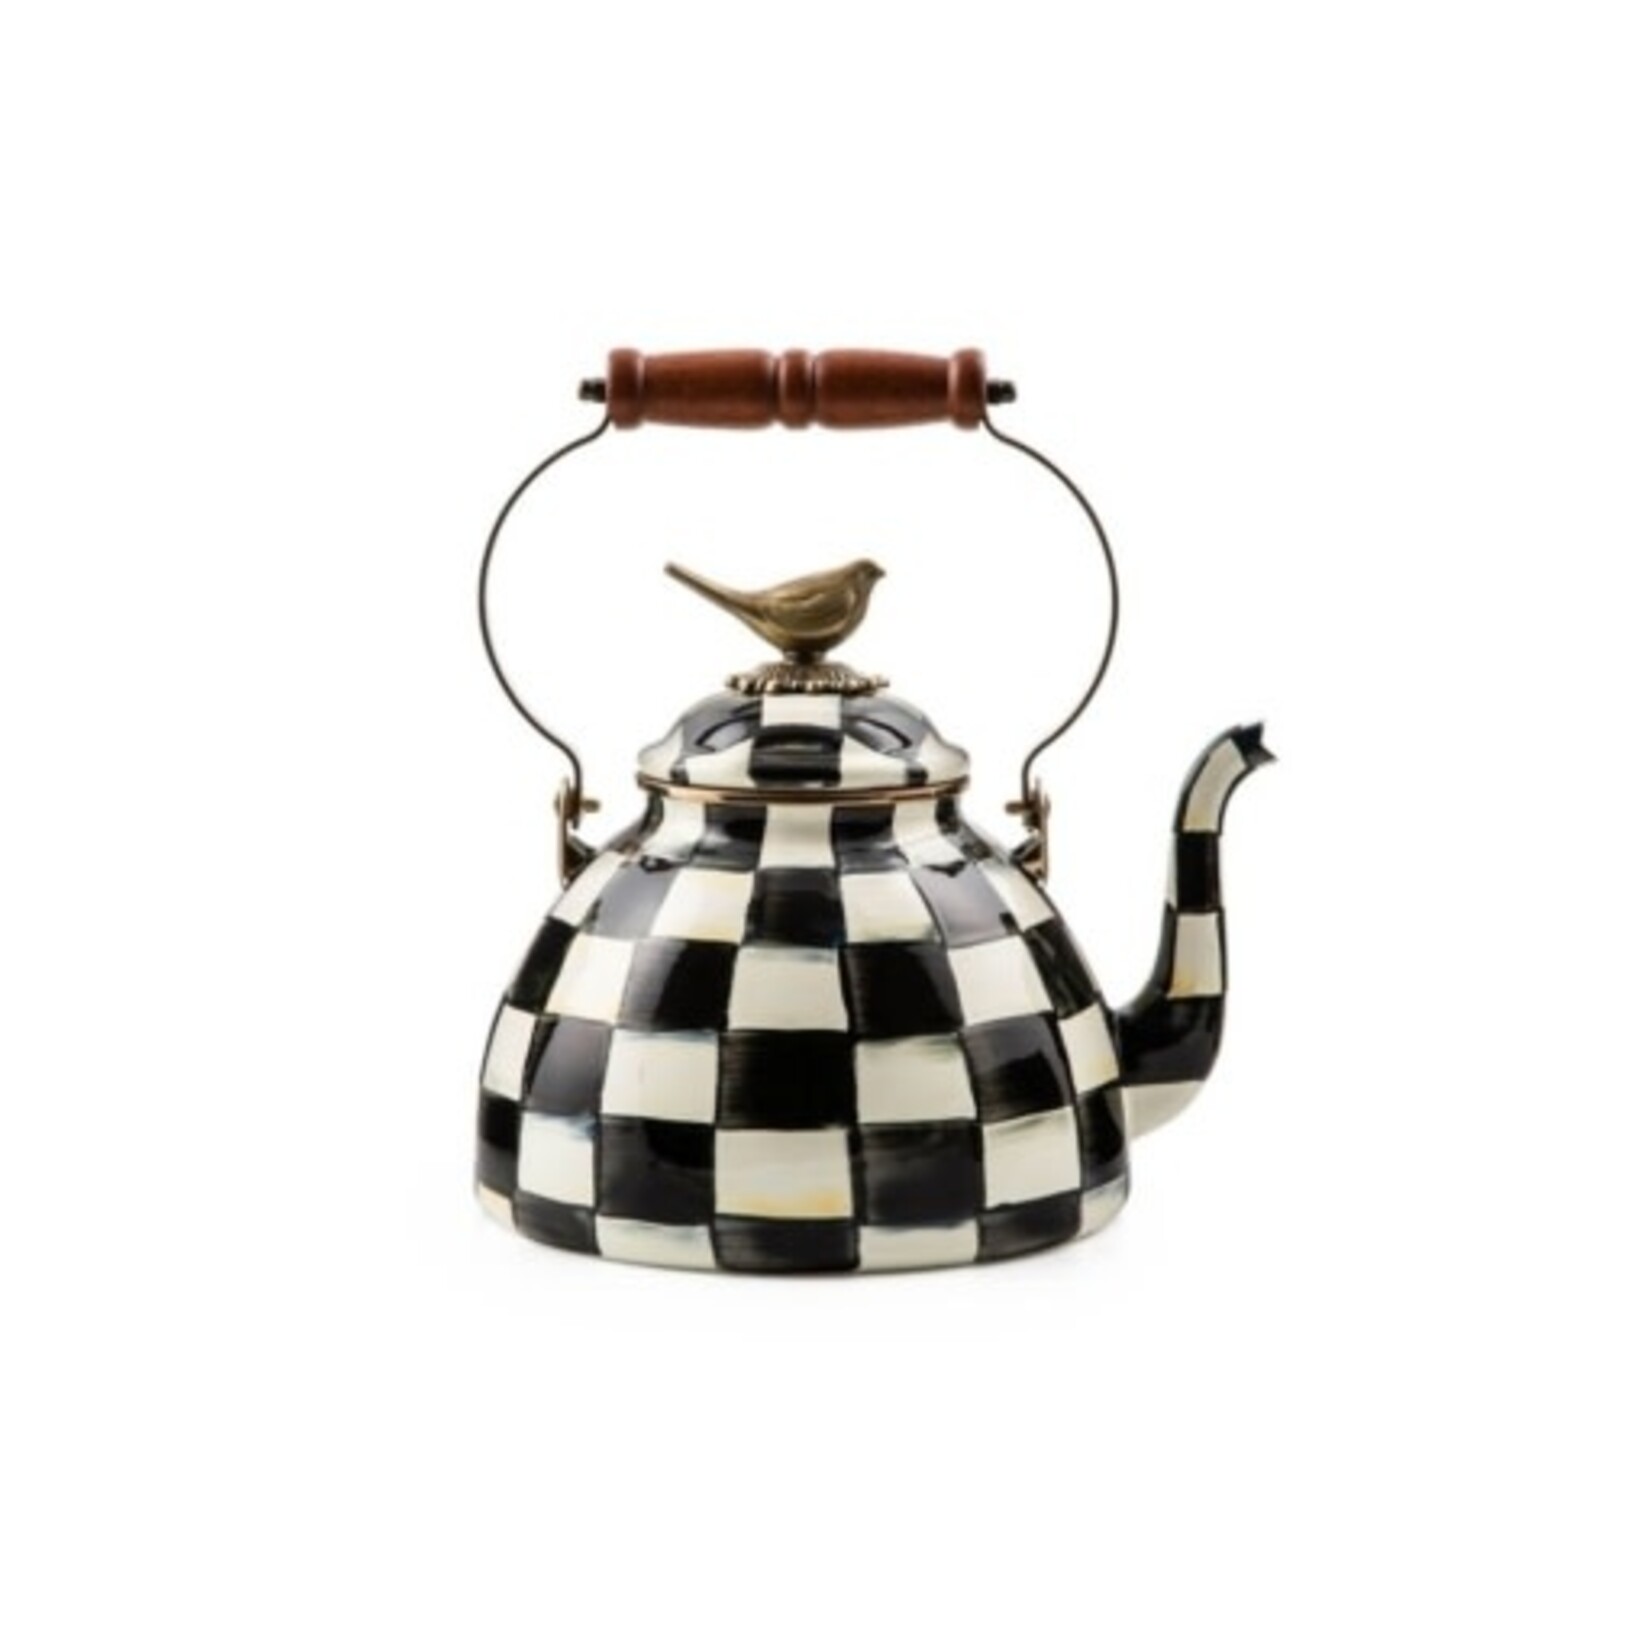 MacKenzie-Childs Courtly Check 3 Quart Tea Kettle with Bird